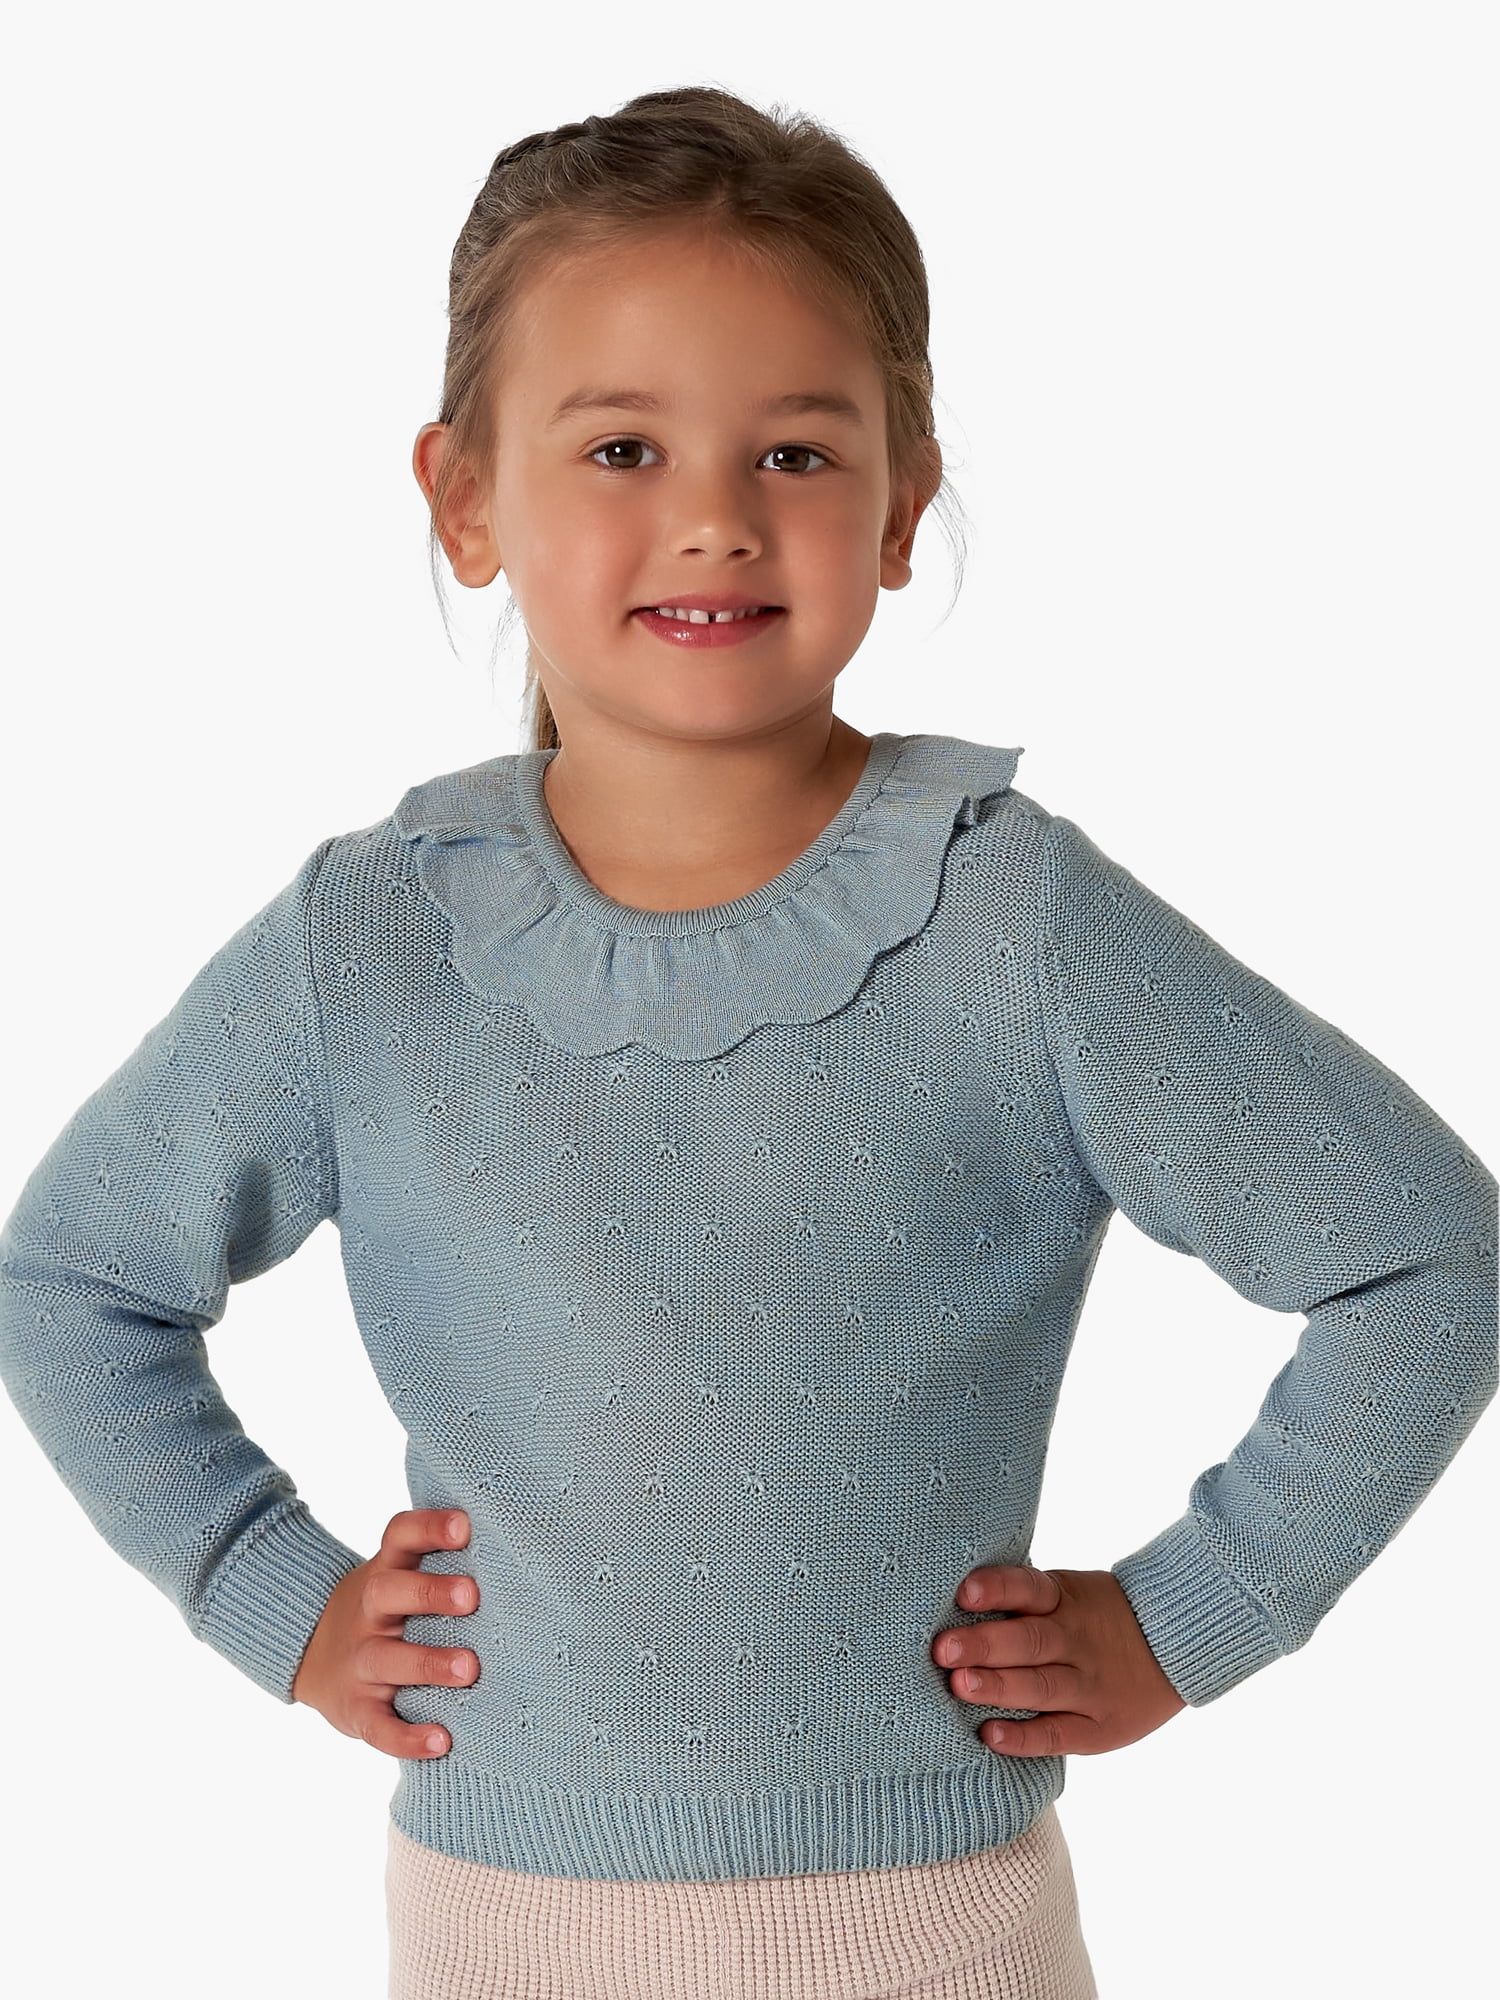 Modern Moments by Gerber Baby and Toddler Girl Pointelle Sweater, Sizes 12 Months -5T | Walmart (US)